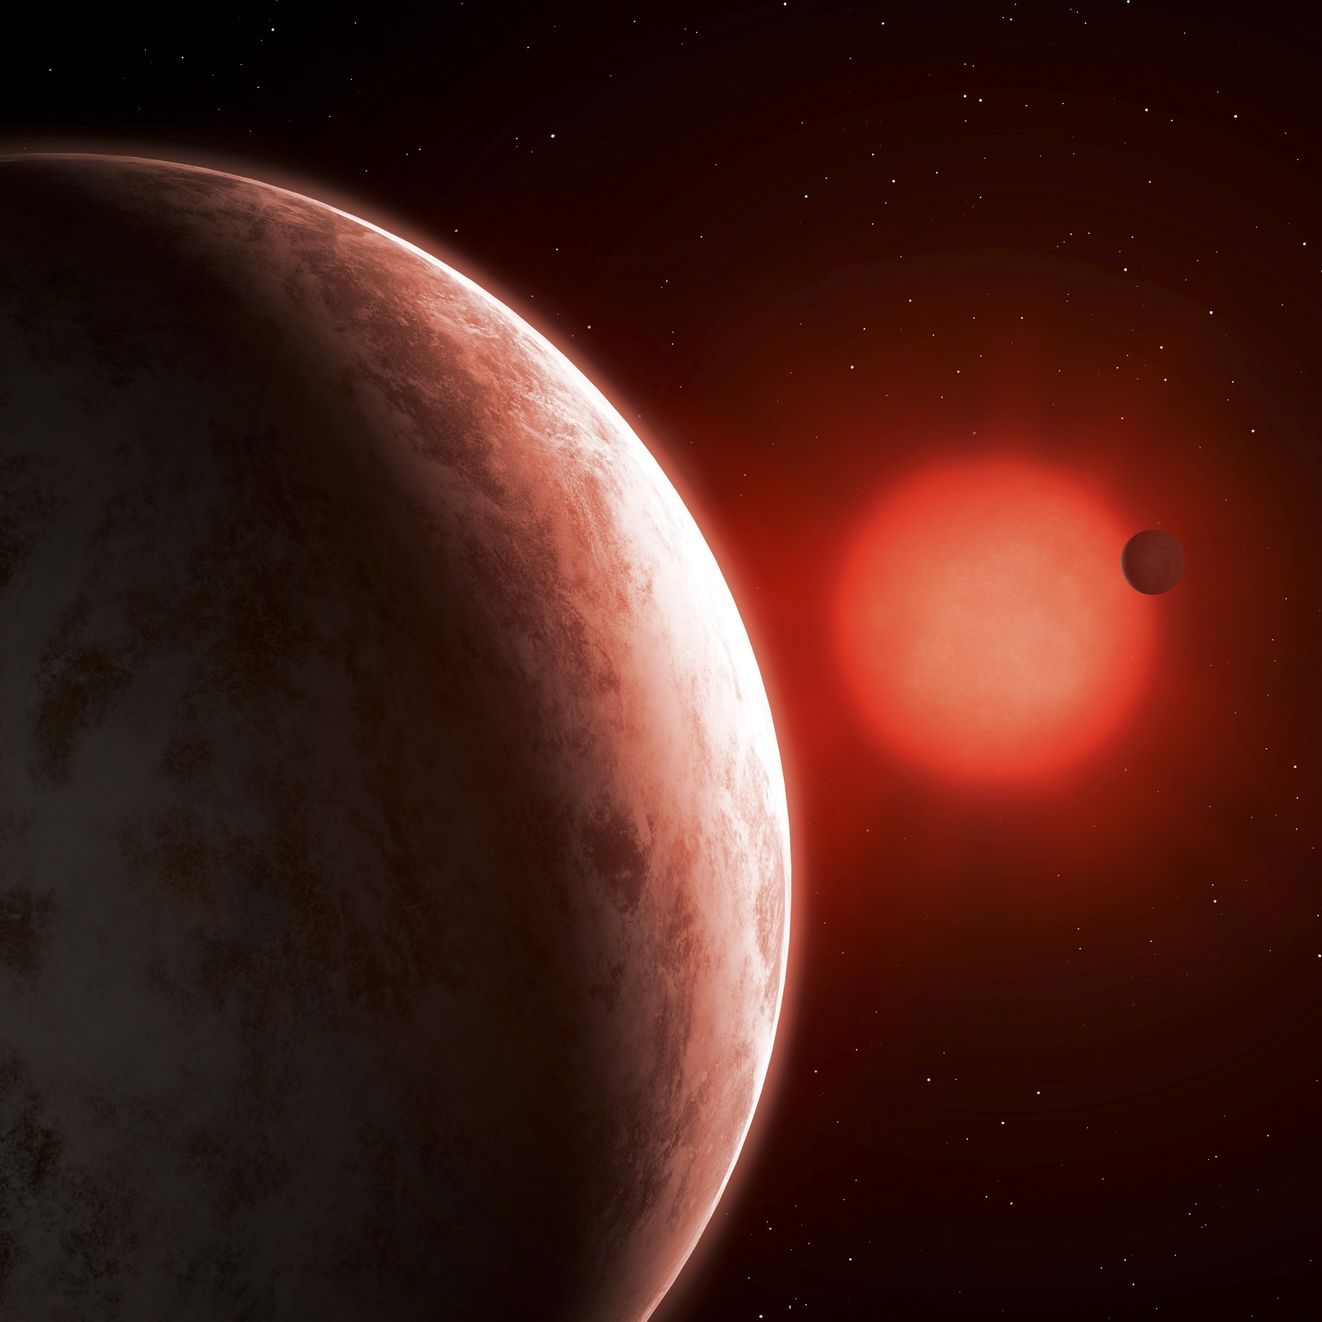 Astronomers Invented a Genius New Way to Look for Exoplanets